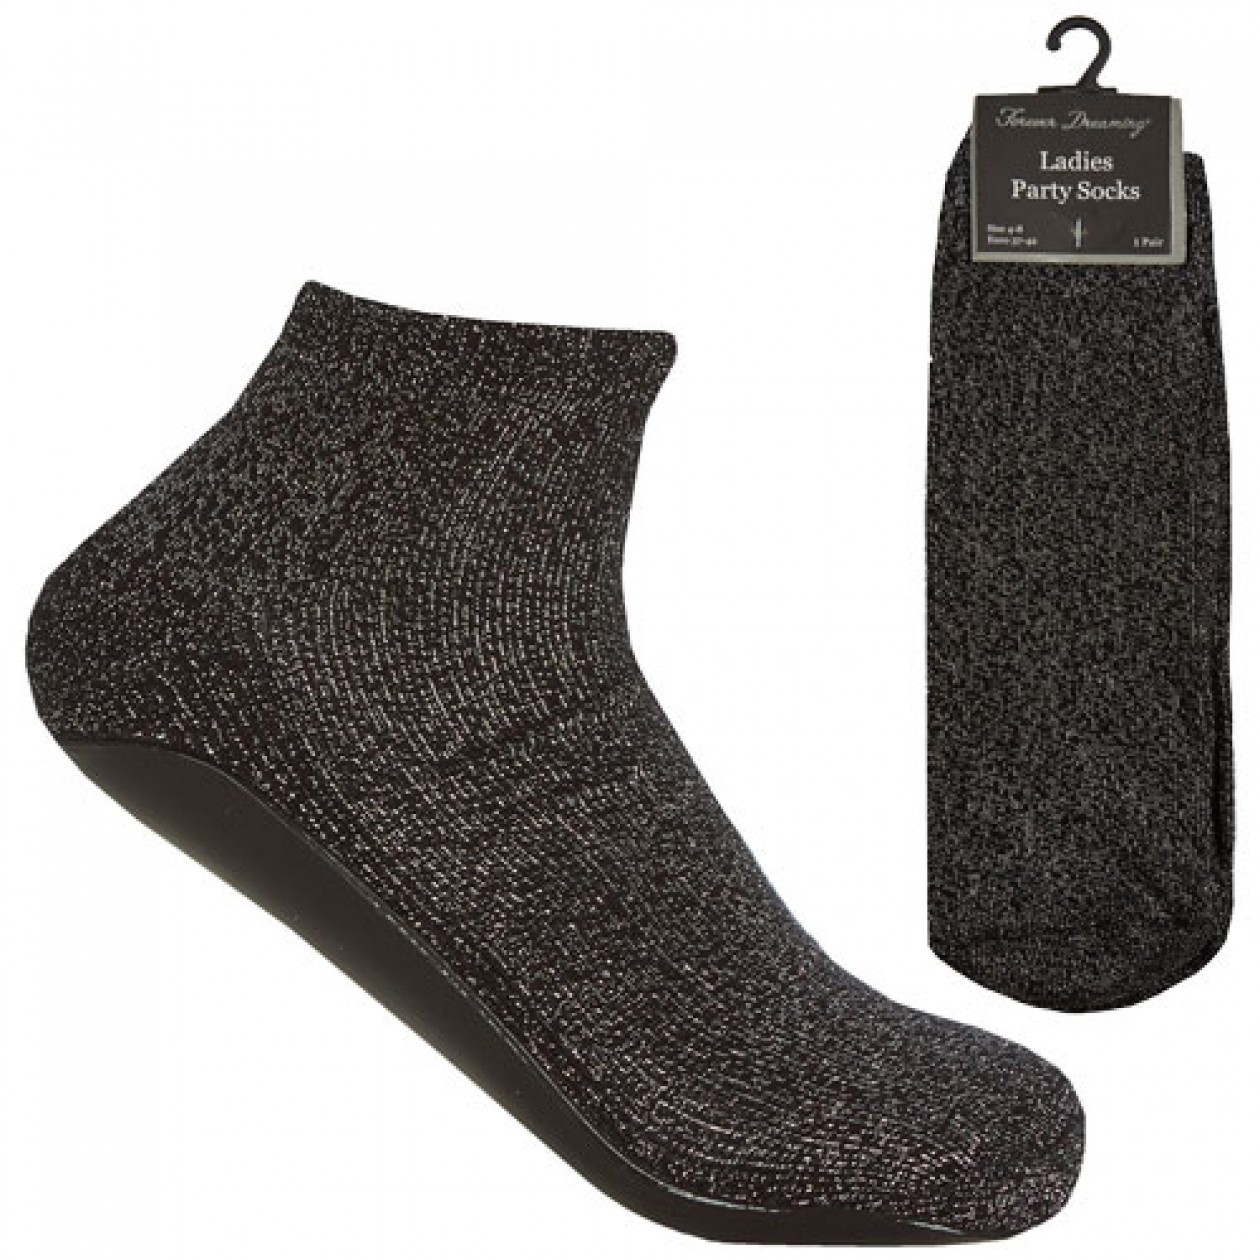 Ladies 1 Pair Party Socks With Gripper Sole